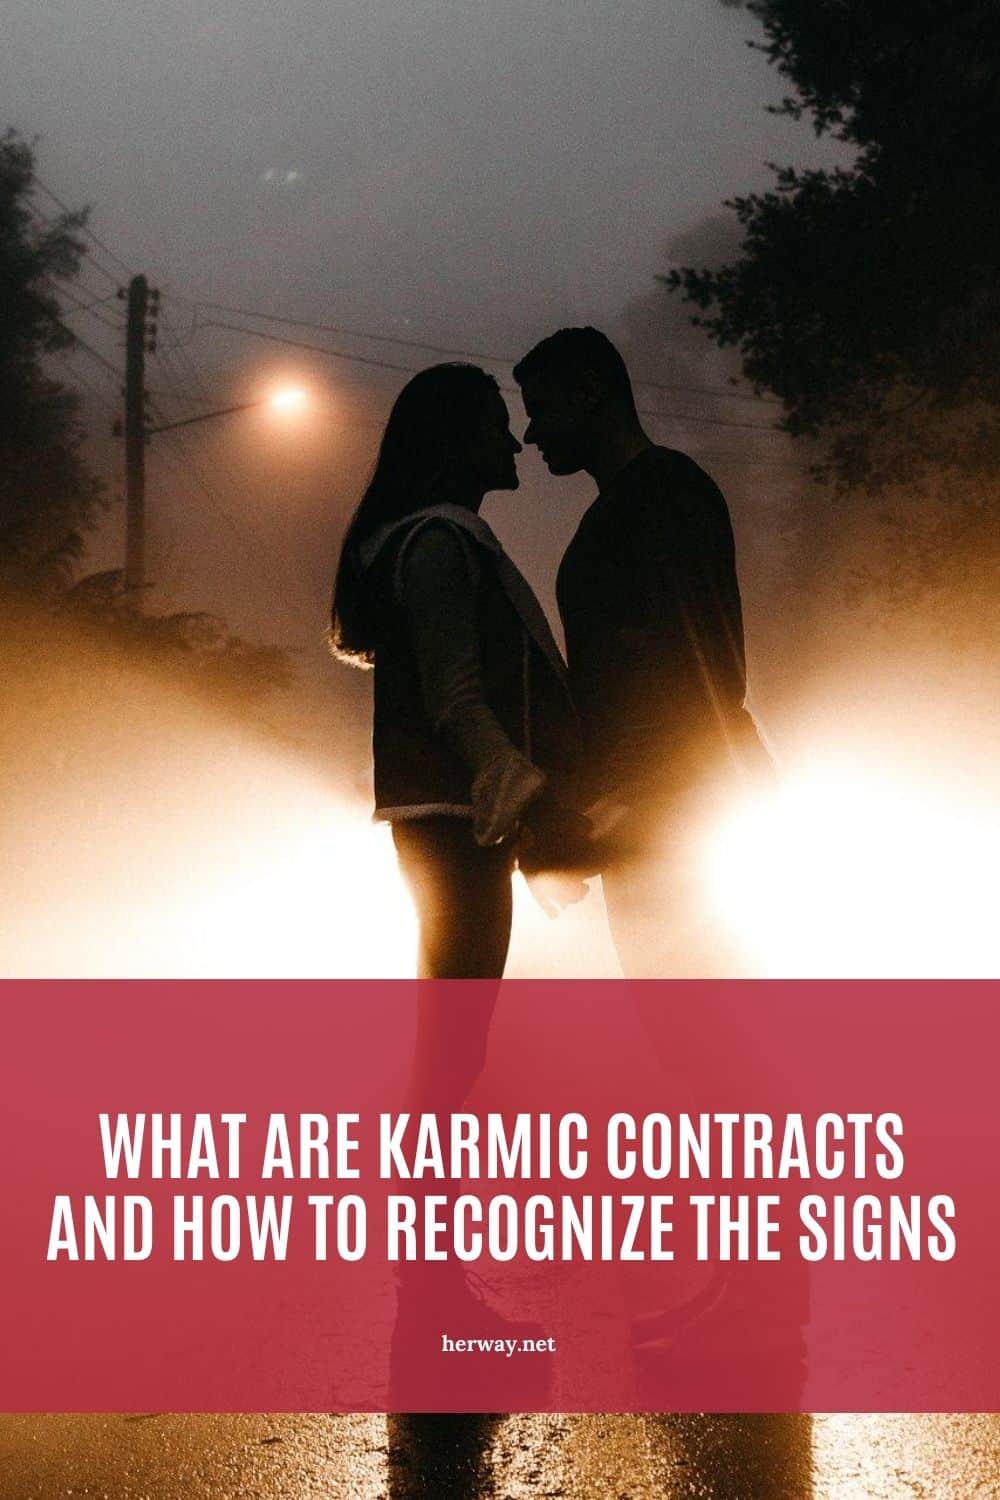 What Are Karmic Contracts And How To Recognize The Signs